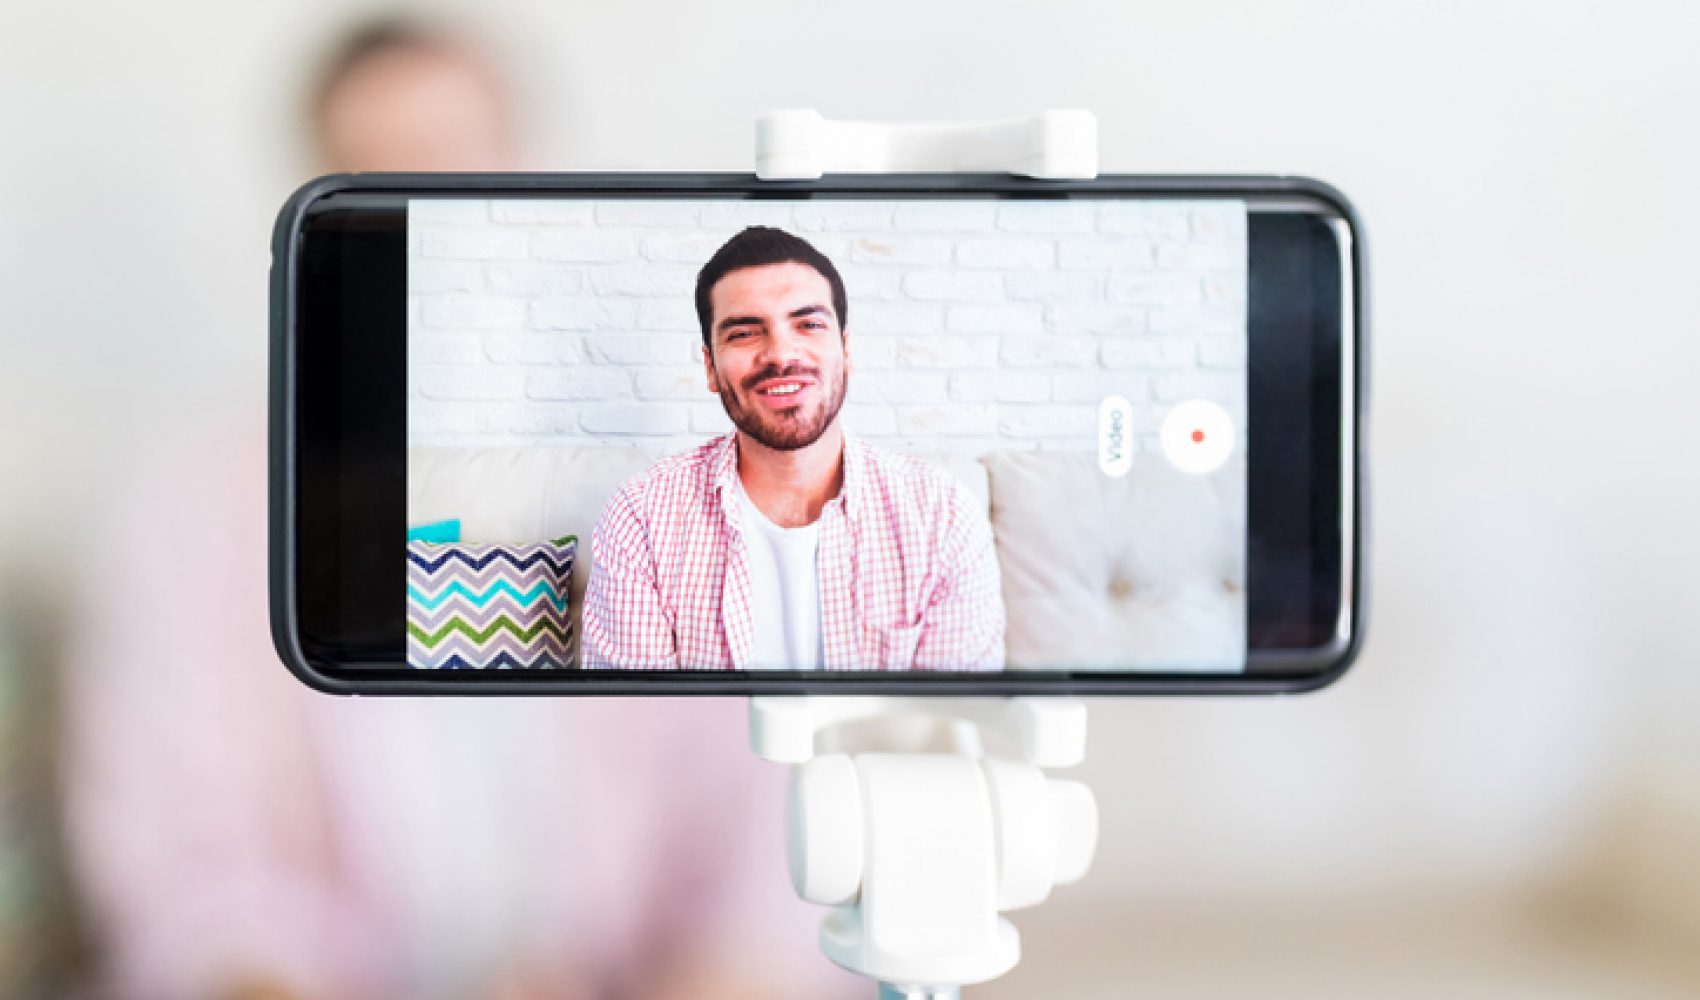 Mobile screen showing the man recording his vlog at home